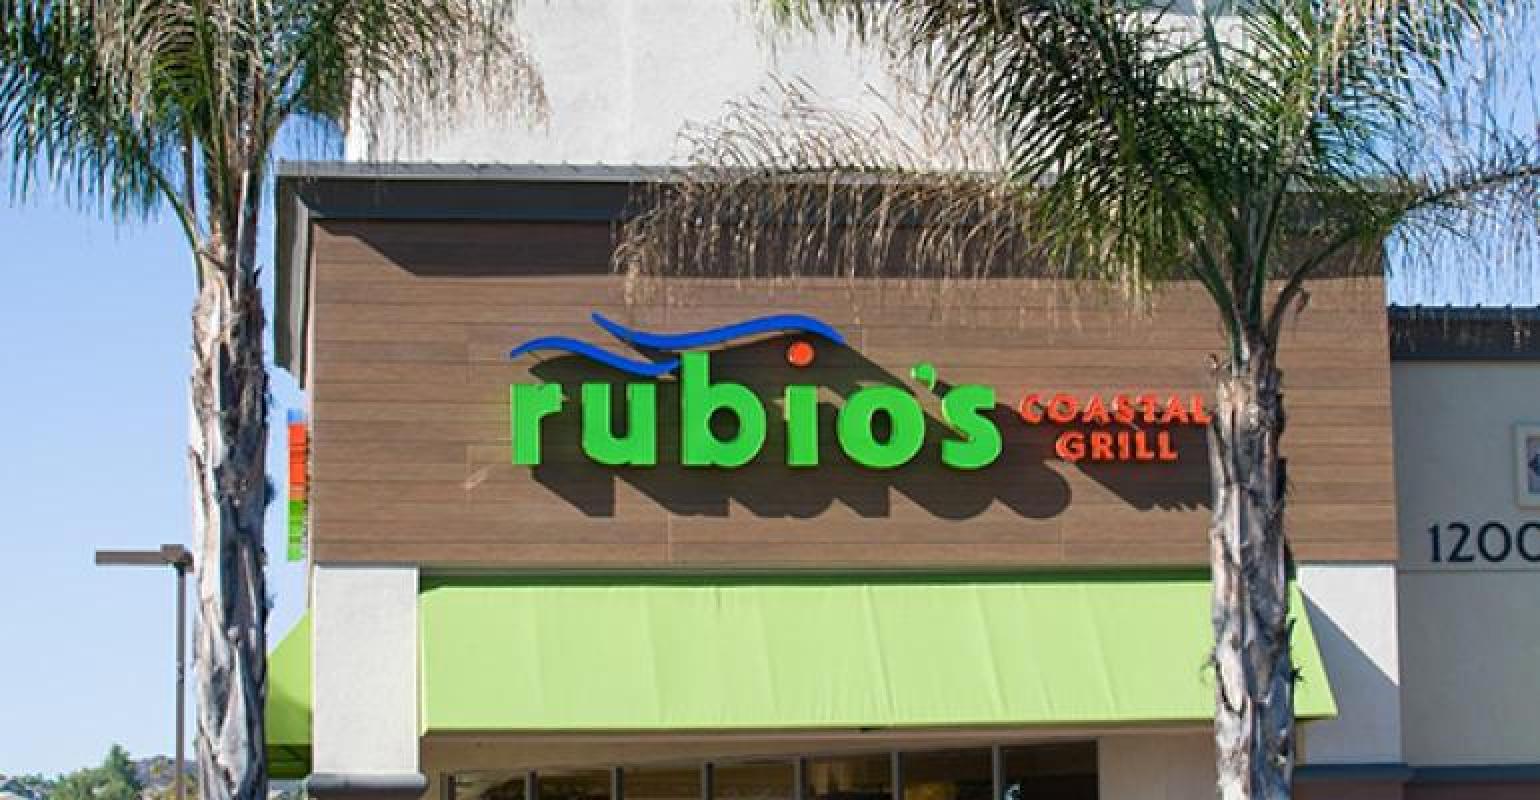 Rubio’s Coastal Grill Hits Rough Waters As the Iconic Restaurant Chain Files for Bankruptcy Amid Store Closures